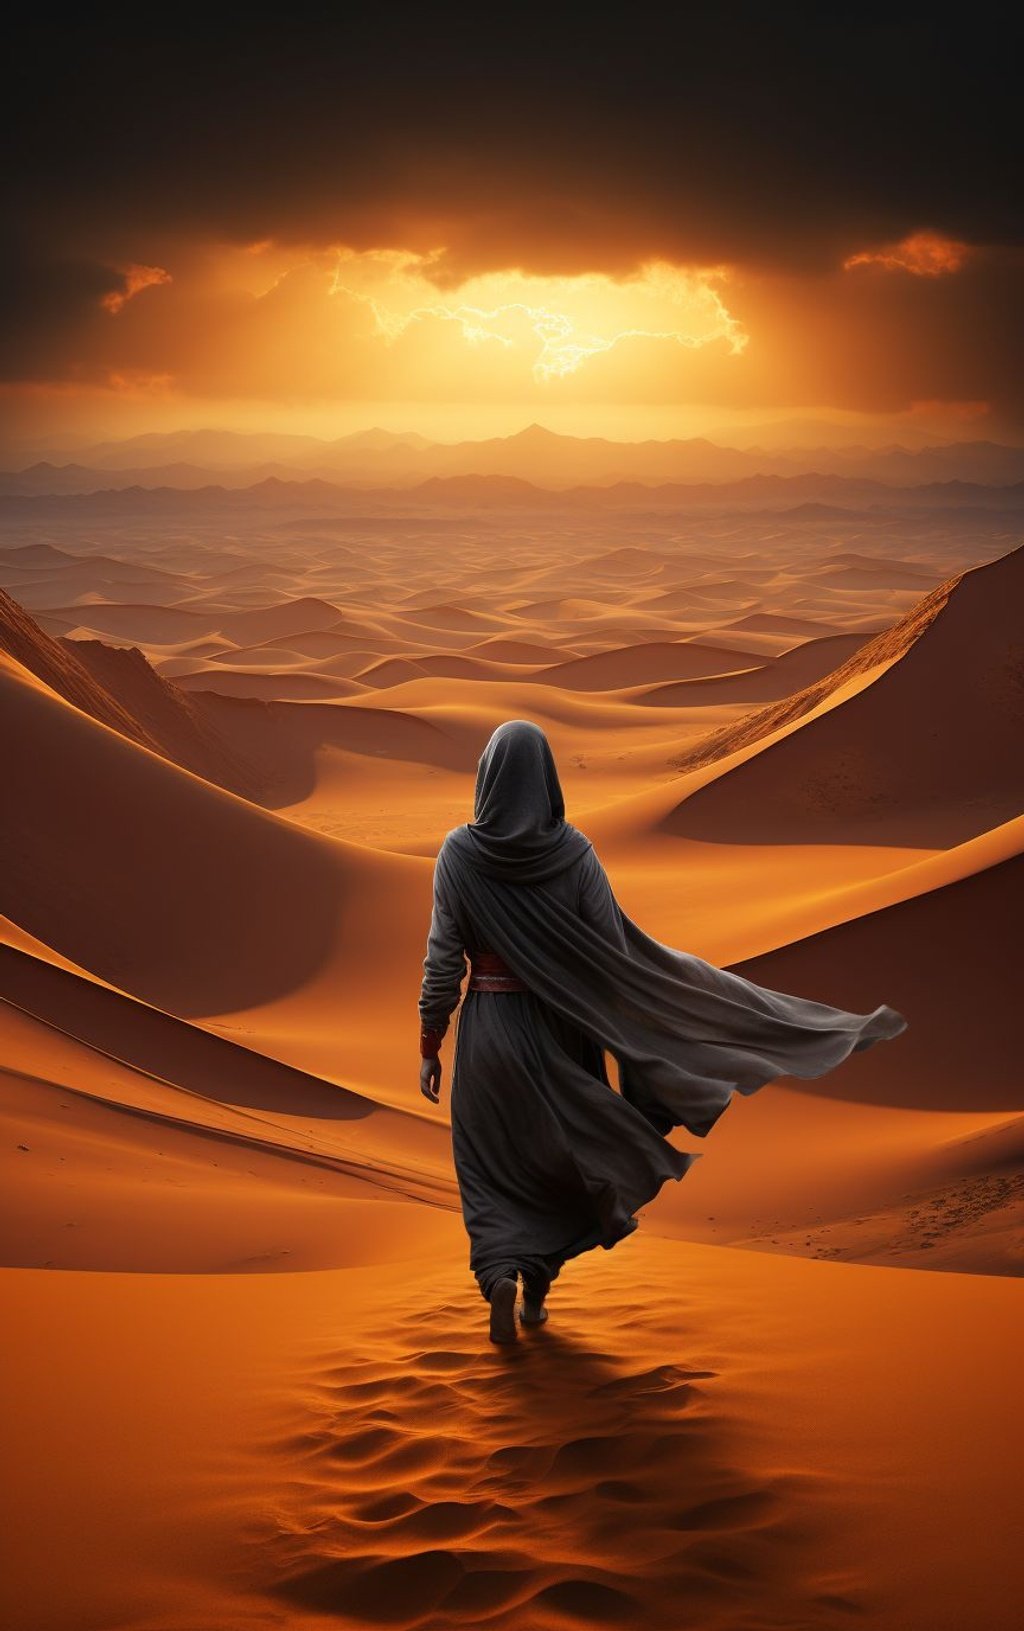 Prompt: desert life hd wallpapers 584x416, in the style of faith-inspired art, moody figurative, uhd image